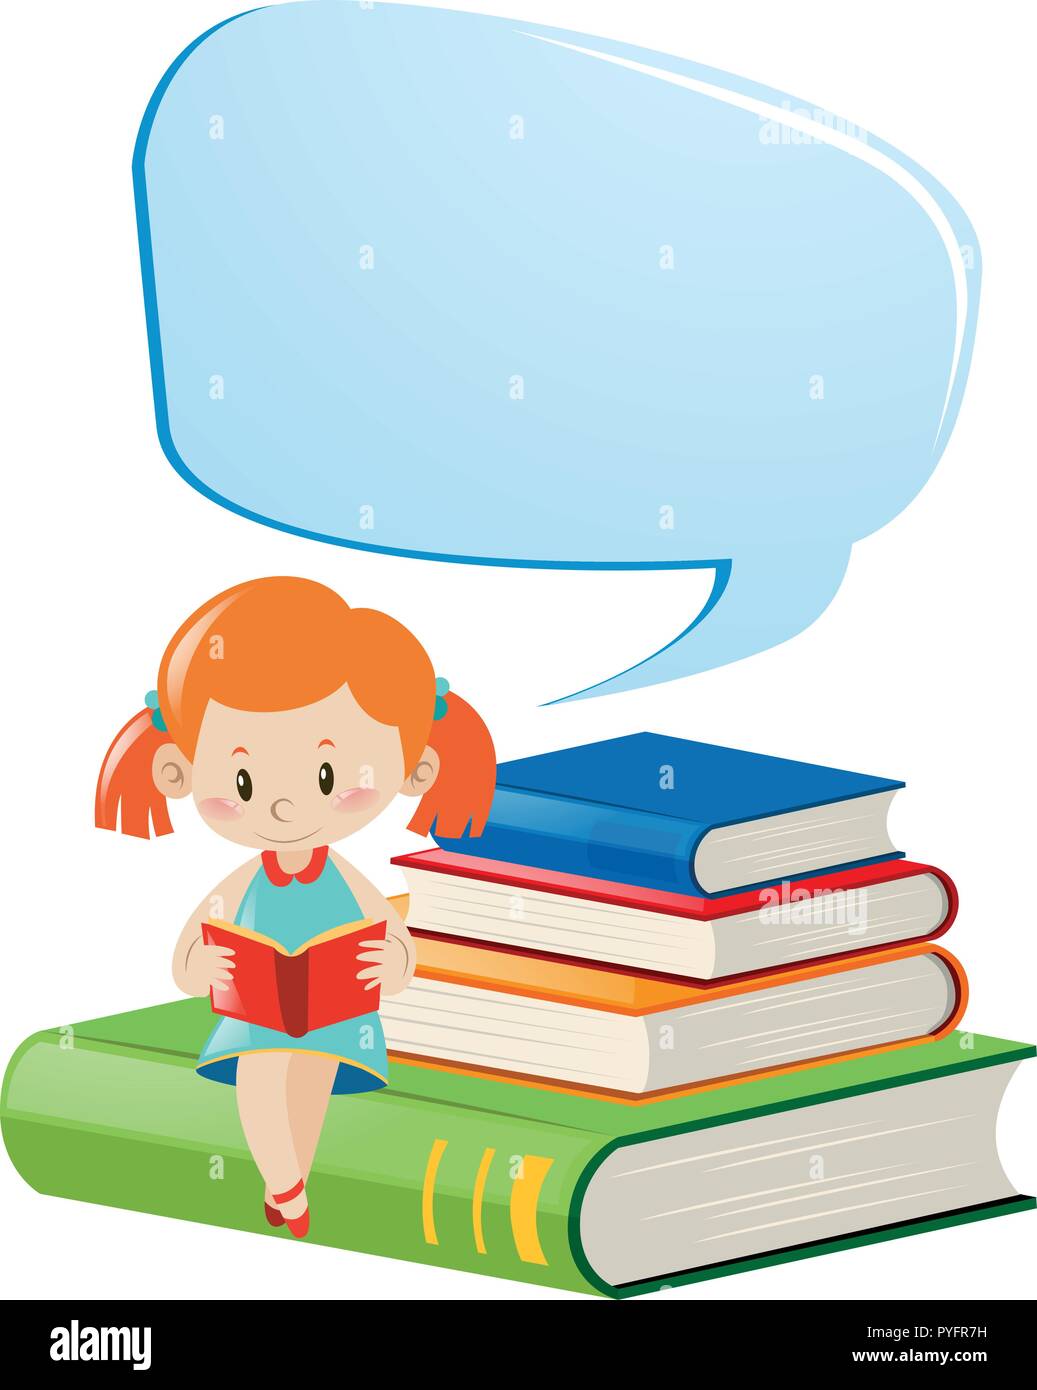 Speech bubble template with girl reading illustration Stock Vector ...